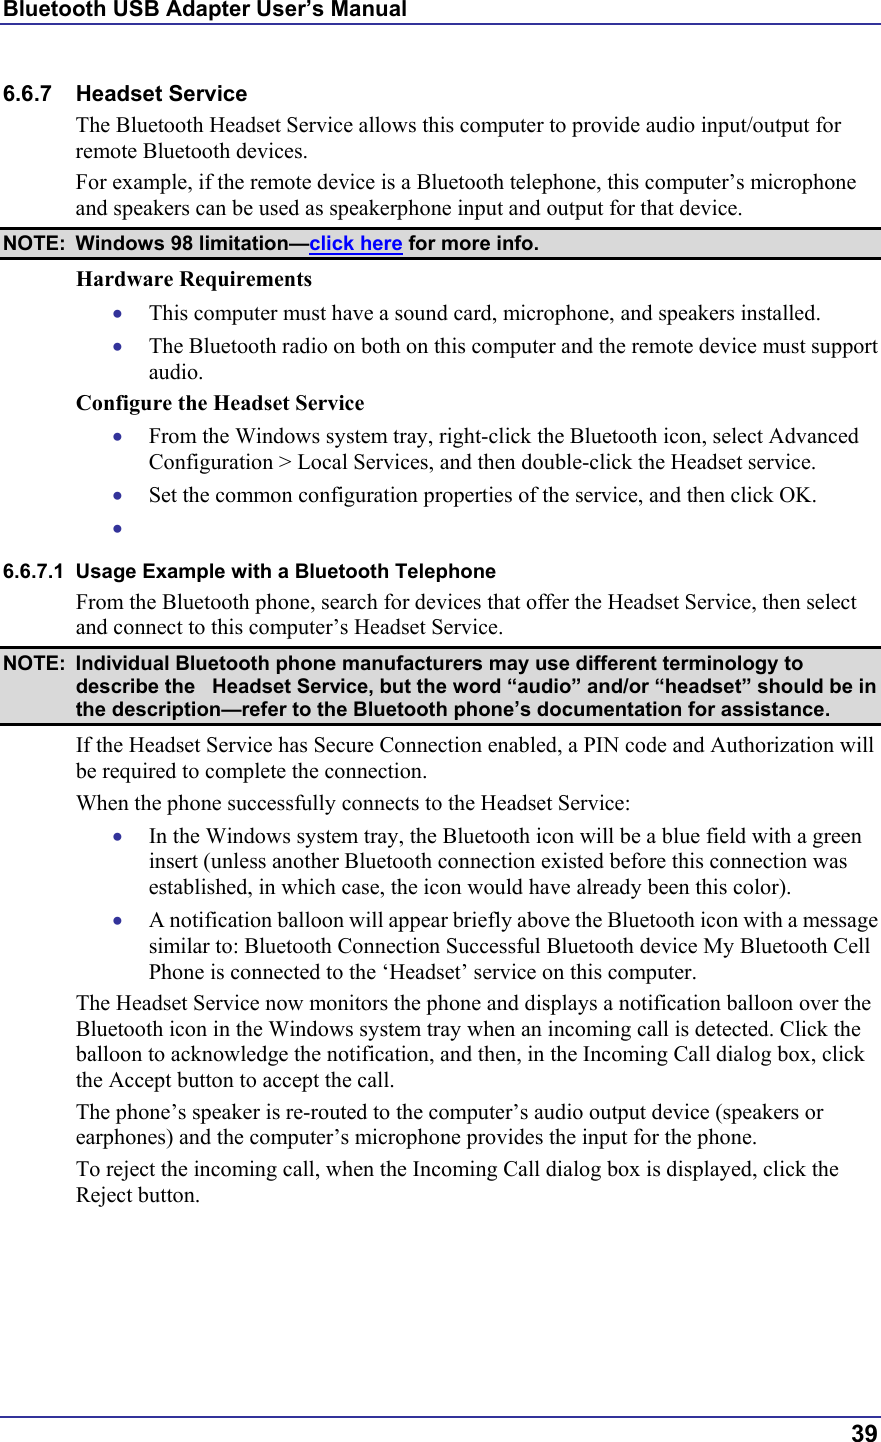 Bluetooth USB Adapter User’s Manual  39 6.6.7 Headset Service The Bluetooth Headset Service allows this computer to provide audio input/output for remote Bluetooth devices. For example, if the remote device is a Bluetooth telephone, this computer’s microphone and speakers can be used as speakerphone input and output for that device. NOTE: Windows 98 limitation—click here for more info. Hardware Requirements •  This computer must have a sound card, microphone, and speakers installed. •  The Bluetooth radio on both on this computer and the remote device must support audio. Configure the Headset Service •  From the Windows system tray, right-click the Bluetooth icon, select Advanced Configuration &gt; Local Services, and then double-click the Headset service. •  Set the common configuration properties of the service, and then click OK. •   6.6.7.1  Usage Example with a Bluetooth Telephone From the Bluetooth phone, search for devices that offer the Headset Service, then select and connect to this computer’s Headset Service. NOTE:  Individual Bluetooth phone manufacturers may use different terminology to describe the   Headset Service, but the word “audio” and/or “headset” should be in the description—refer to the Bluetooth phone’s documentation for assistance. If the Headset Service has Secure Connection enabled, a PIN code and Authorization will be required to complete the connection. When the phone successfully connects to the Headset Service: •  In the Windows system tray, the Bluetooth icon will be a blue field with a green insert (unless another Bluetooth connection existed before this connection was established, in which case, the icon would have already been this color). •  A notification balloon will appear briefly above the Bluetooth icon with a message similar to: Bluetooth Connection Successful Bluetooth device My Bluetooth Cell Phone is connected to the ‘Headset’ service on this computer. The Headset Service now monitors the phone and displays a notification balloon over the Bluetooth icon in the Windows system tray when an incoming call is detected. Click the balloon to acknowledge the notification, and then, in the Incoming Call dialog box, click the Accept button to accept the call. The phone’s speaker is re-routed to the computer’s audio output device (speakers or earphones) and the computer’s microphone provides the input for the phone. To reject the incoming call, when the Incoming Call dialog box is displayed, click the Reject button. 